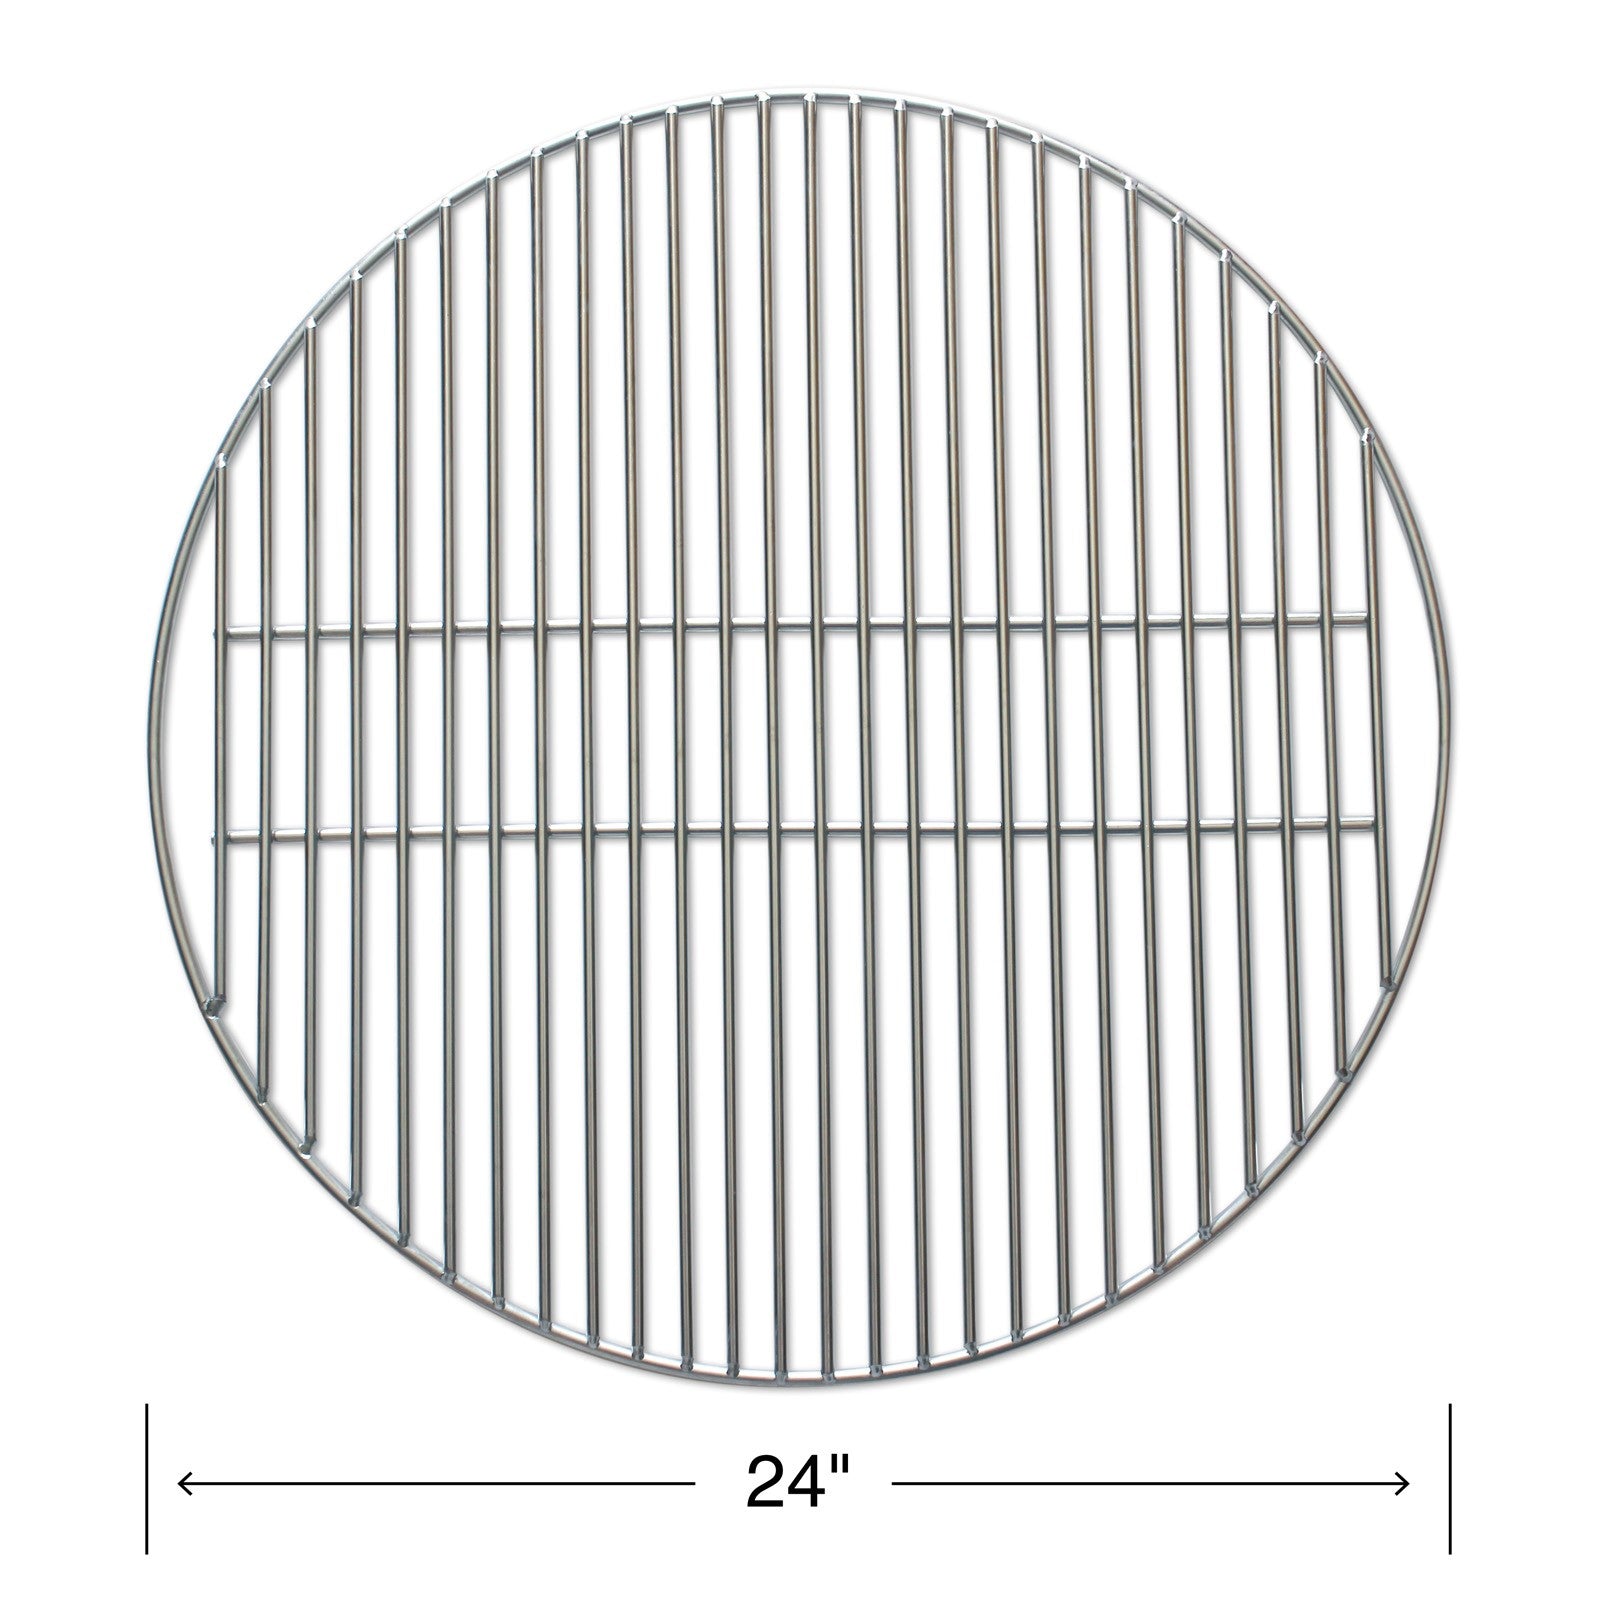 internettet kuvert kontrollere Heavy Stainless Steel Grill Grates - Three Sizes Available - Smokeware